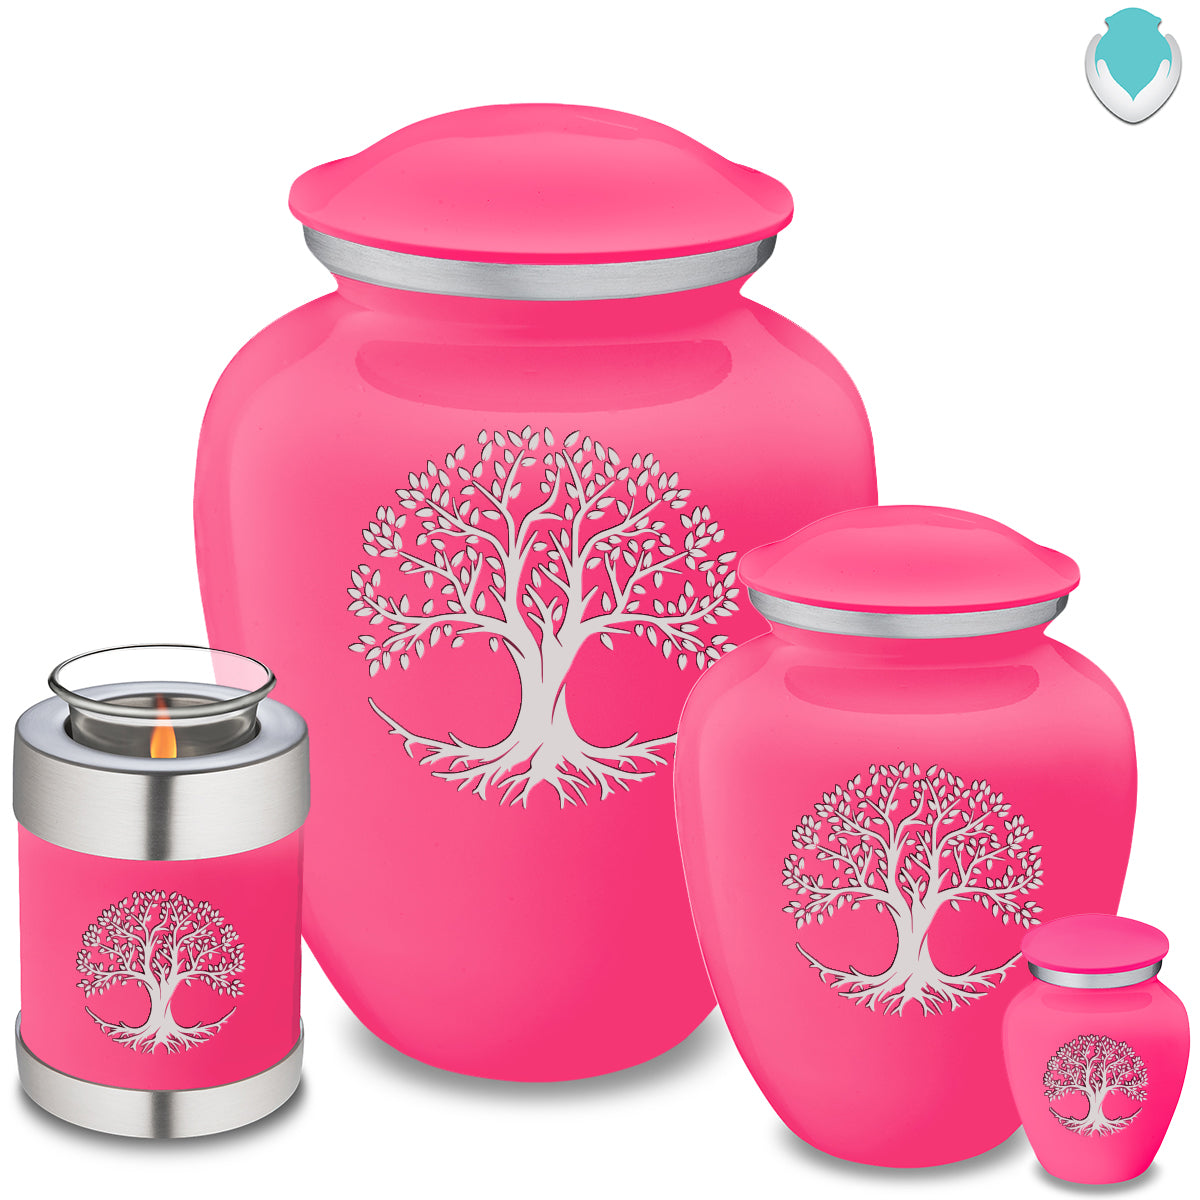 Adult Embrace Bright Pink Tree of Life Cremation Urn